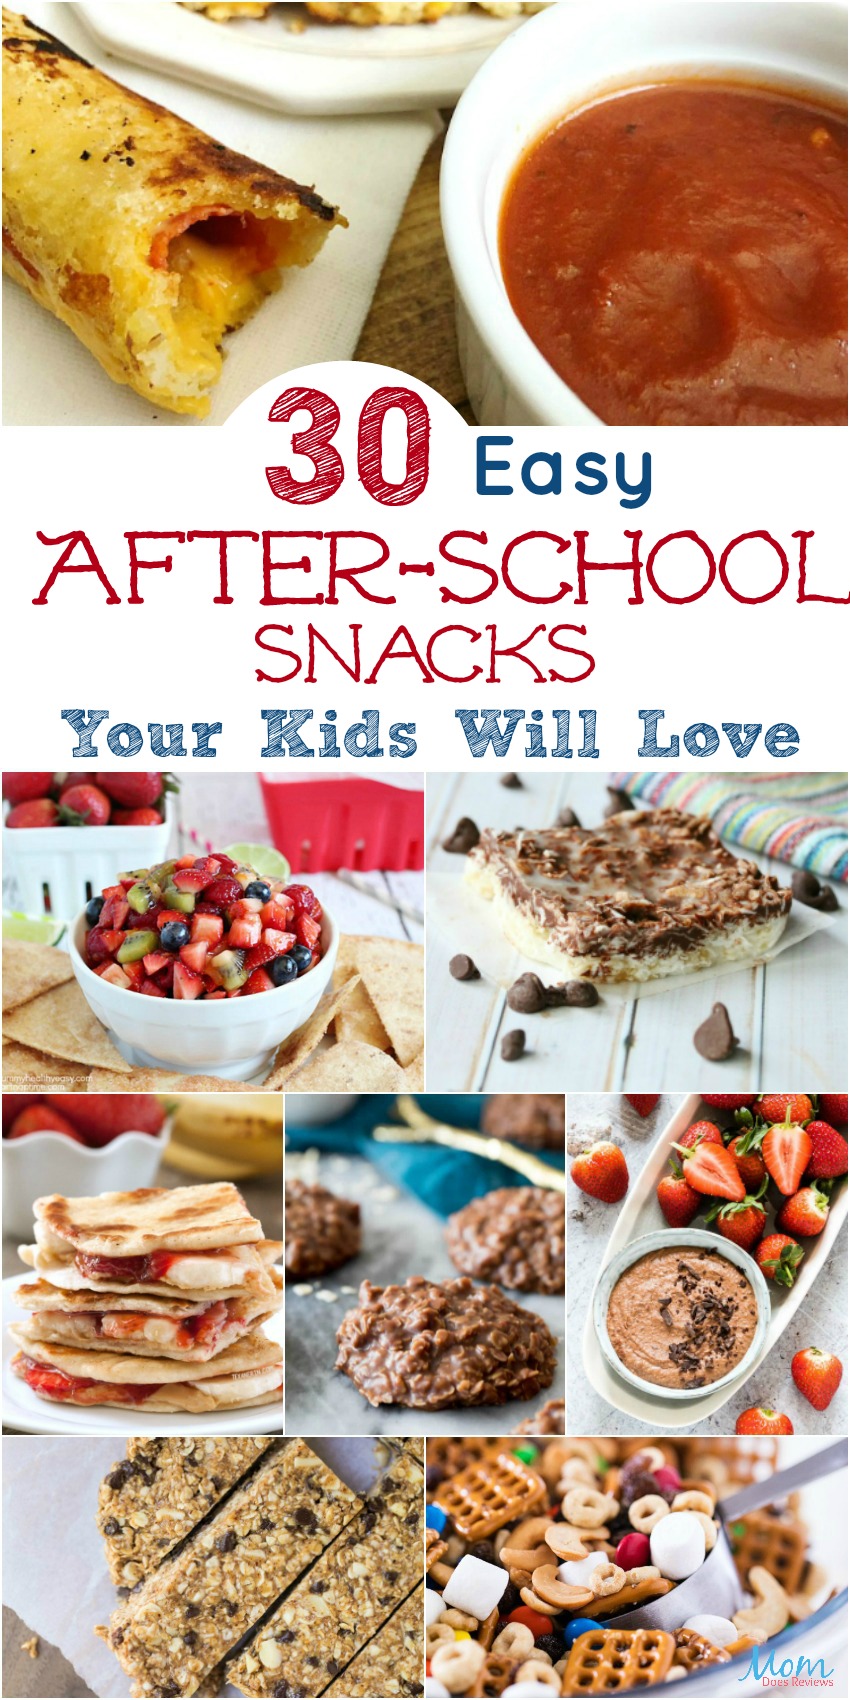 30 Easy After-School Snacks Your Kids Will Love 